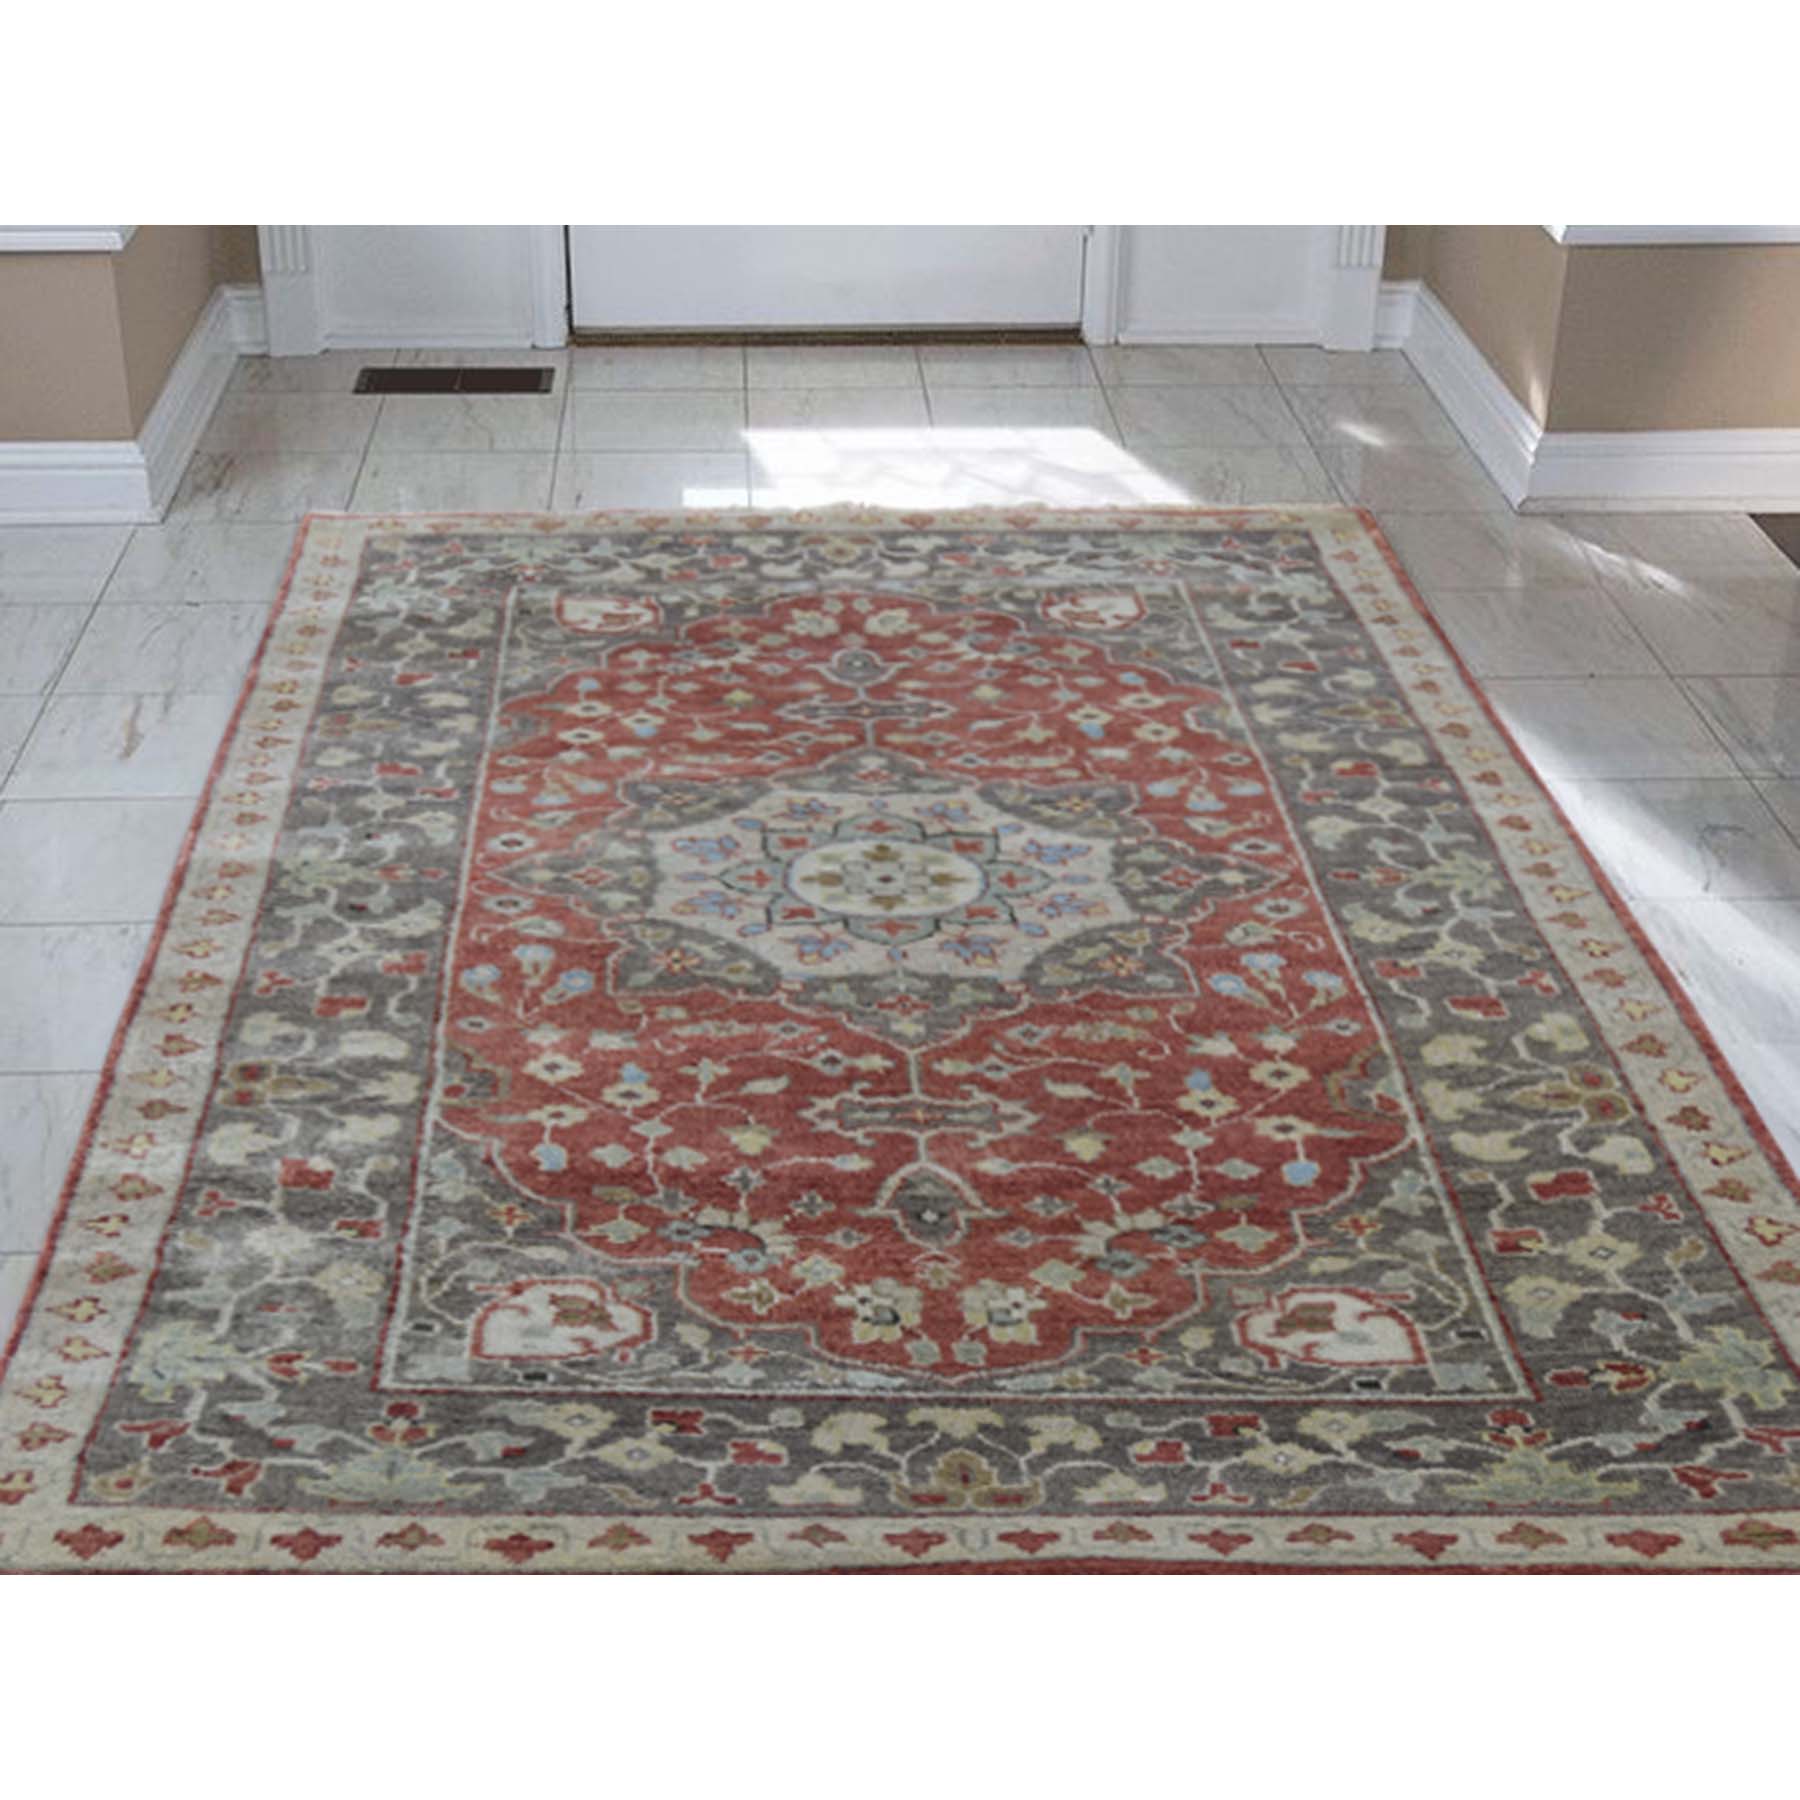 3-x5- Antiqued Haji Jalili Re-creation Hand-Knotted Oriental Rug 